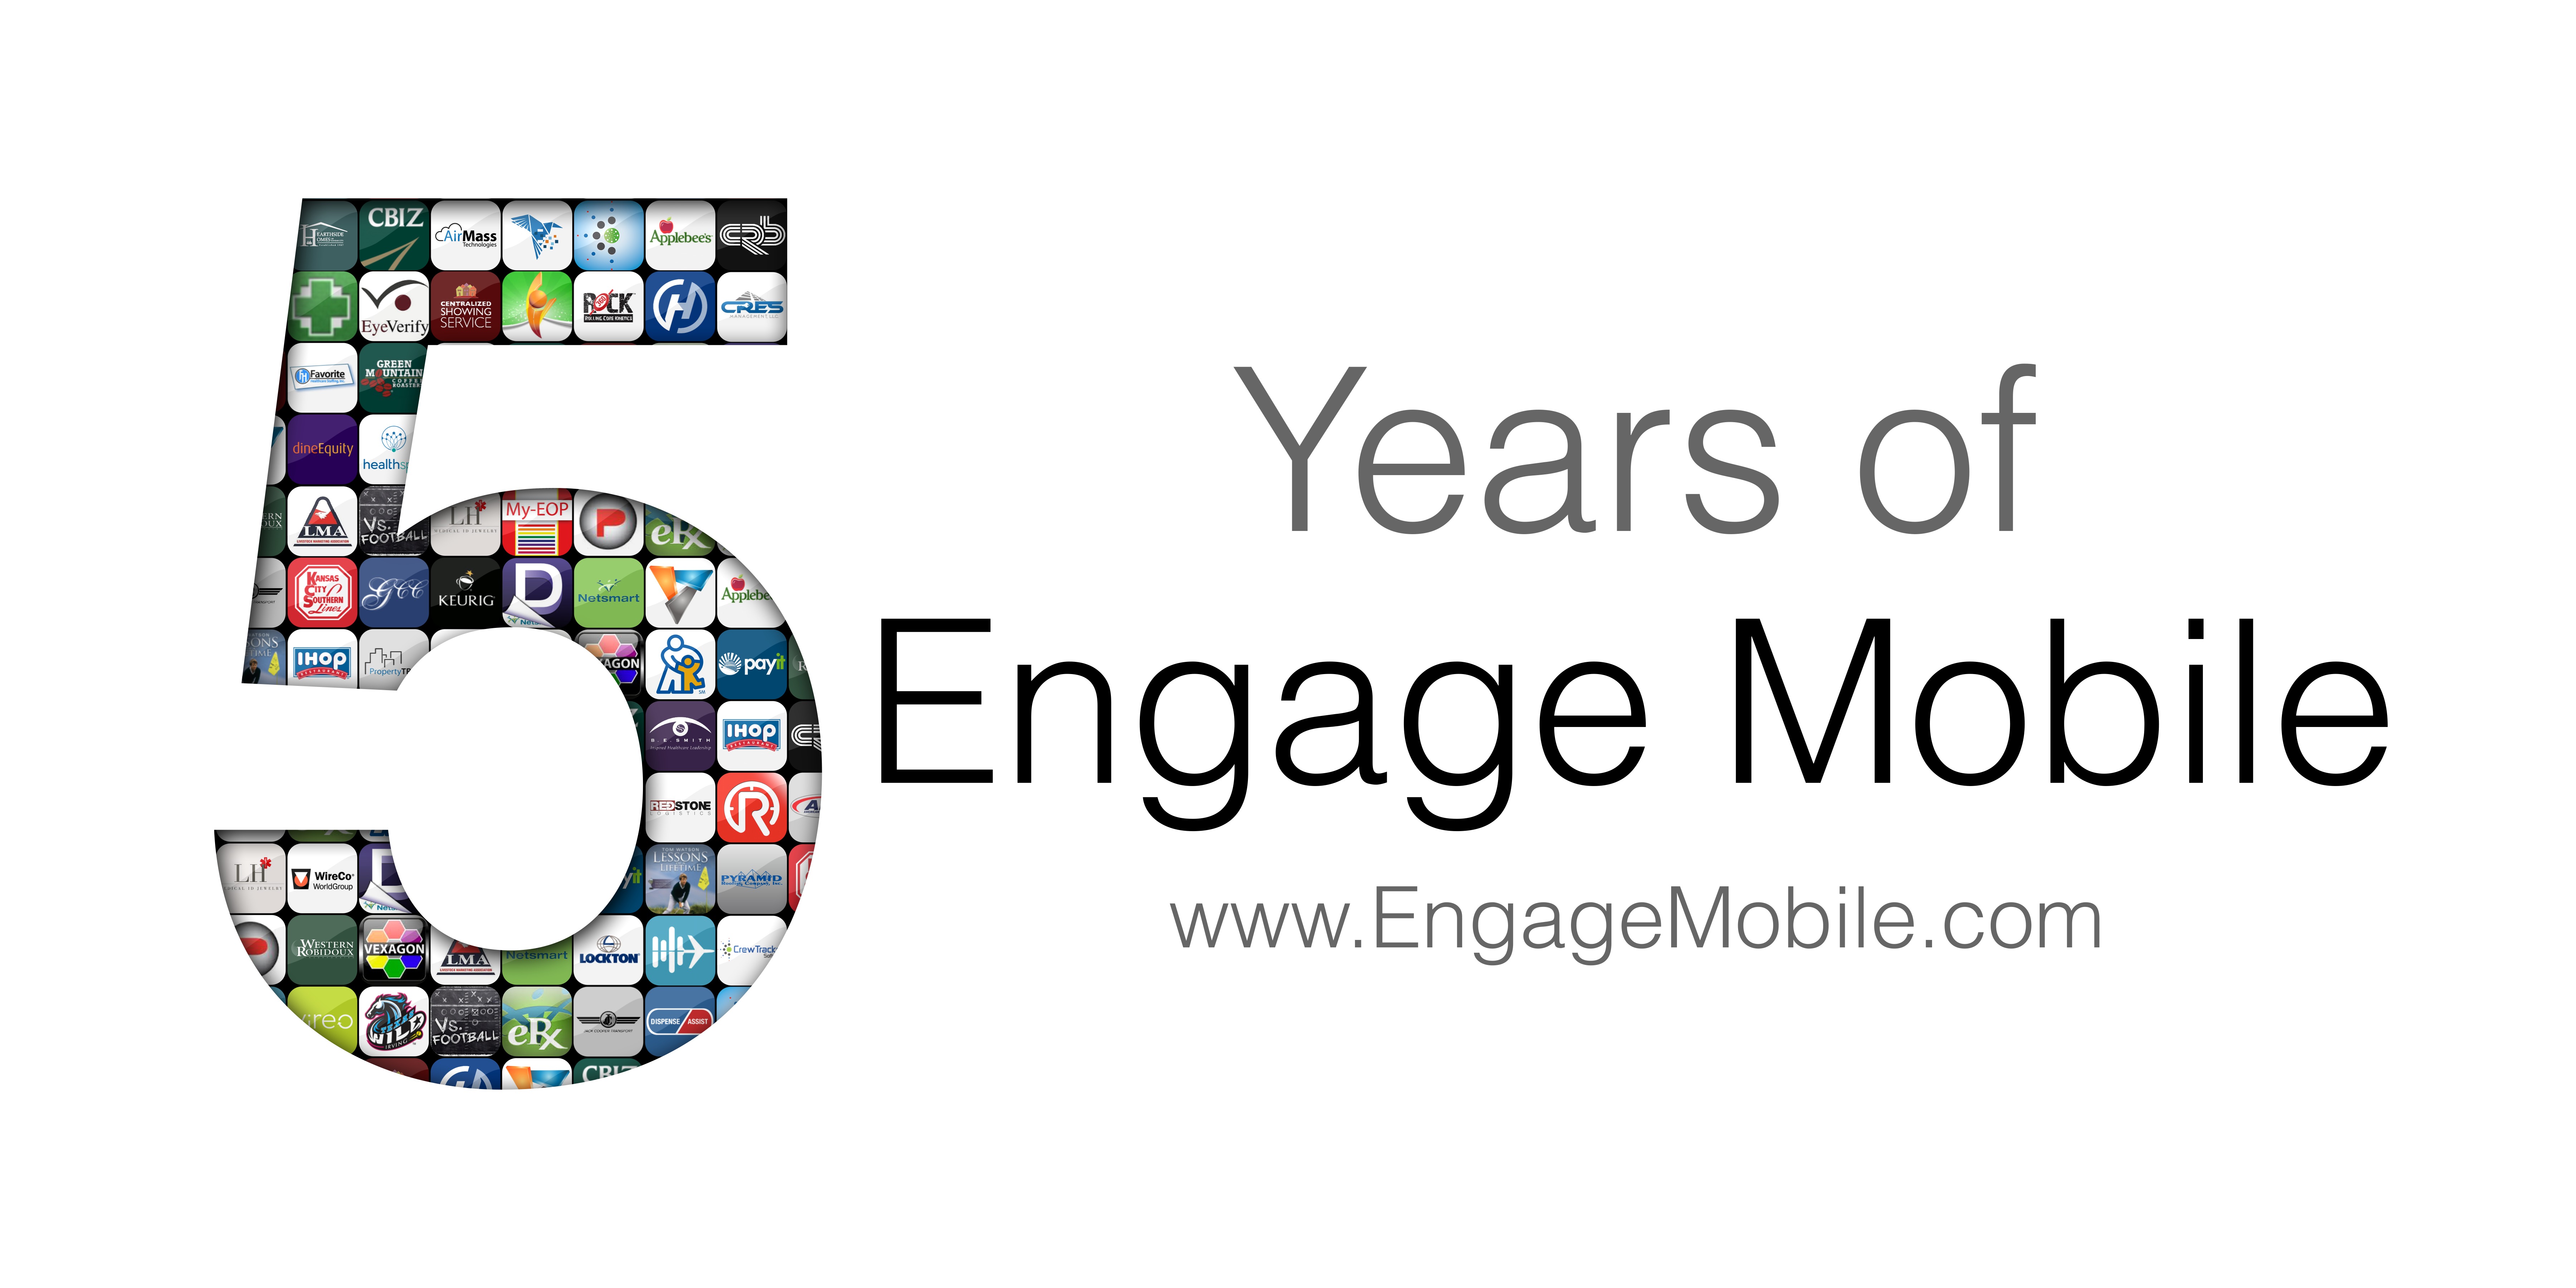 Engage Mobile 5 Year Anniversary Logo